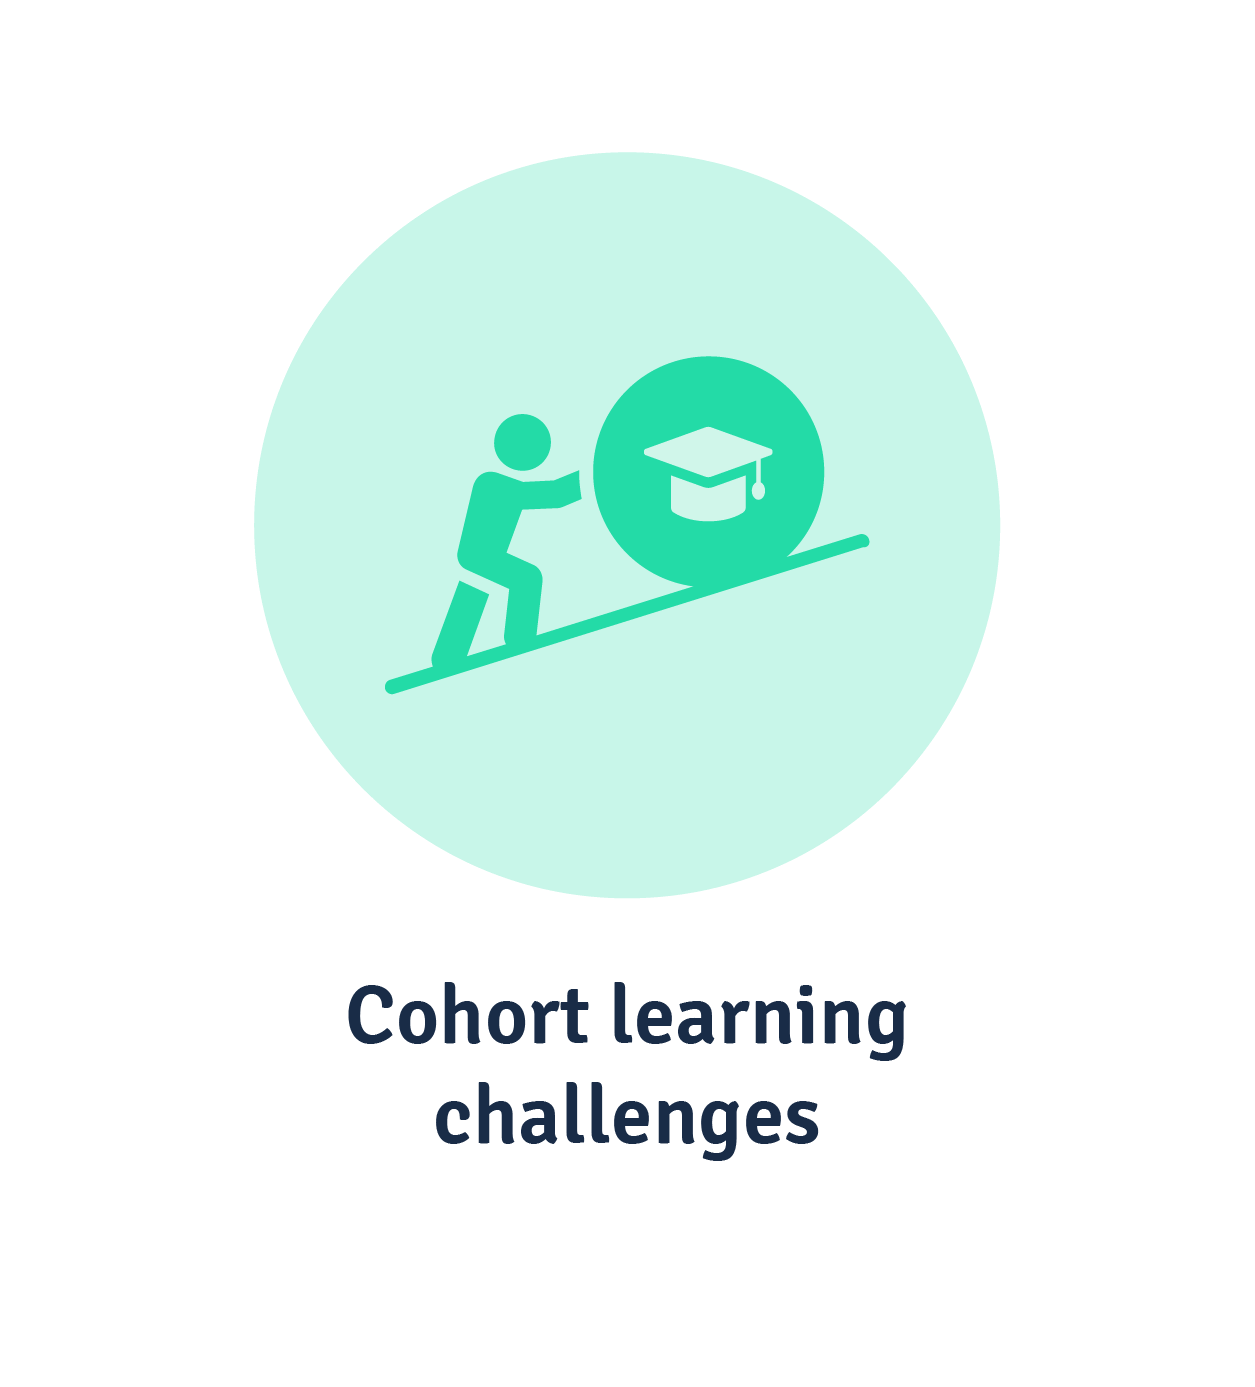 Cohort learning challenges